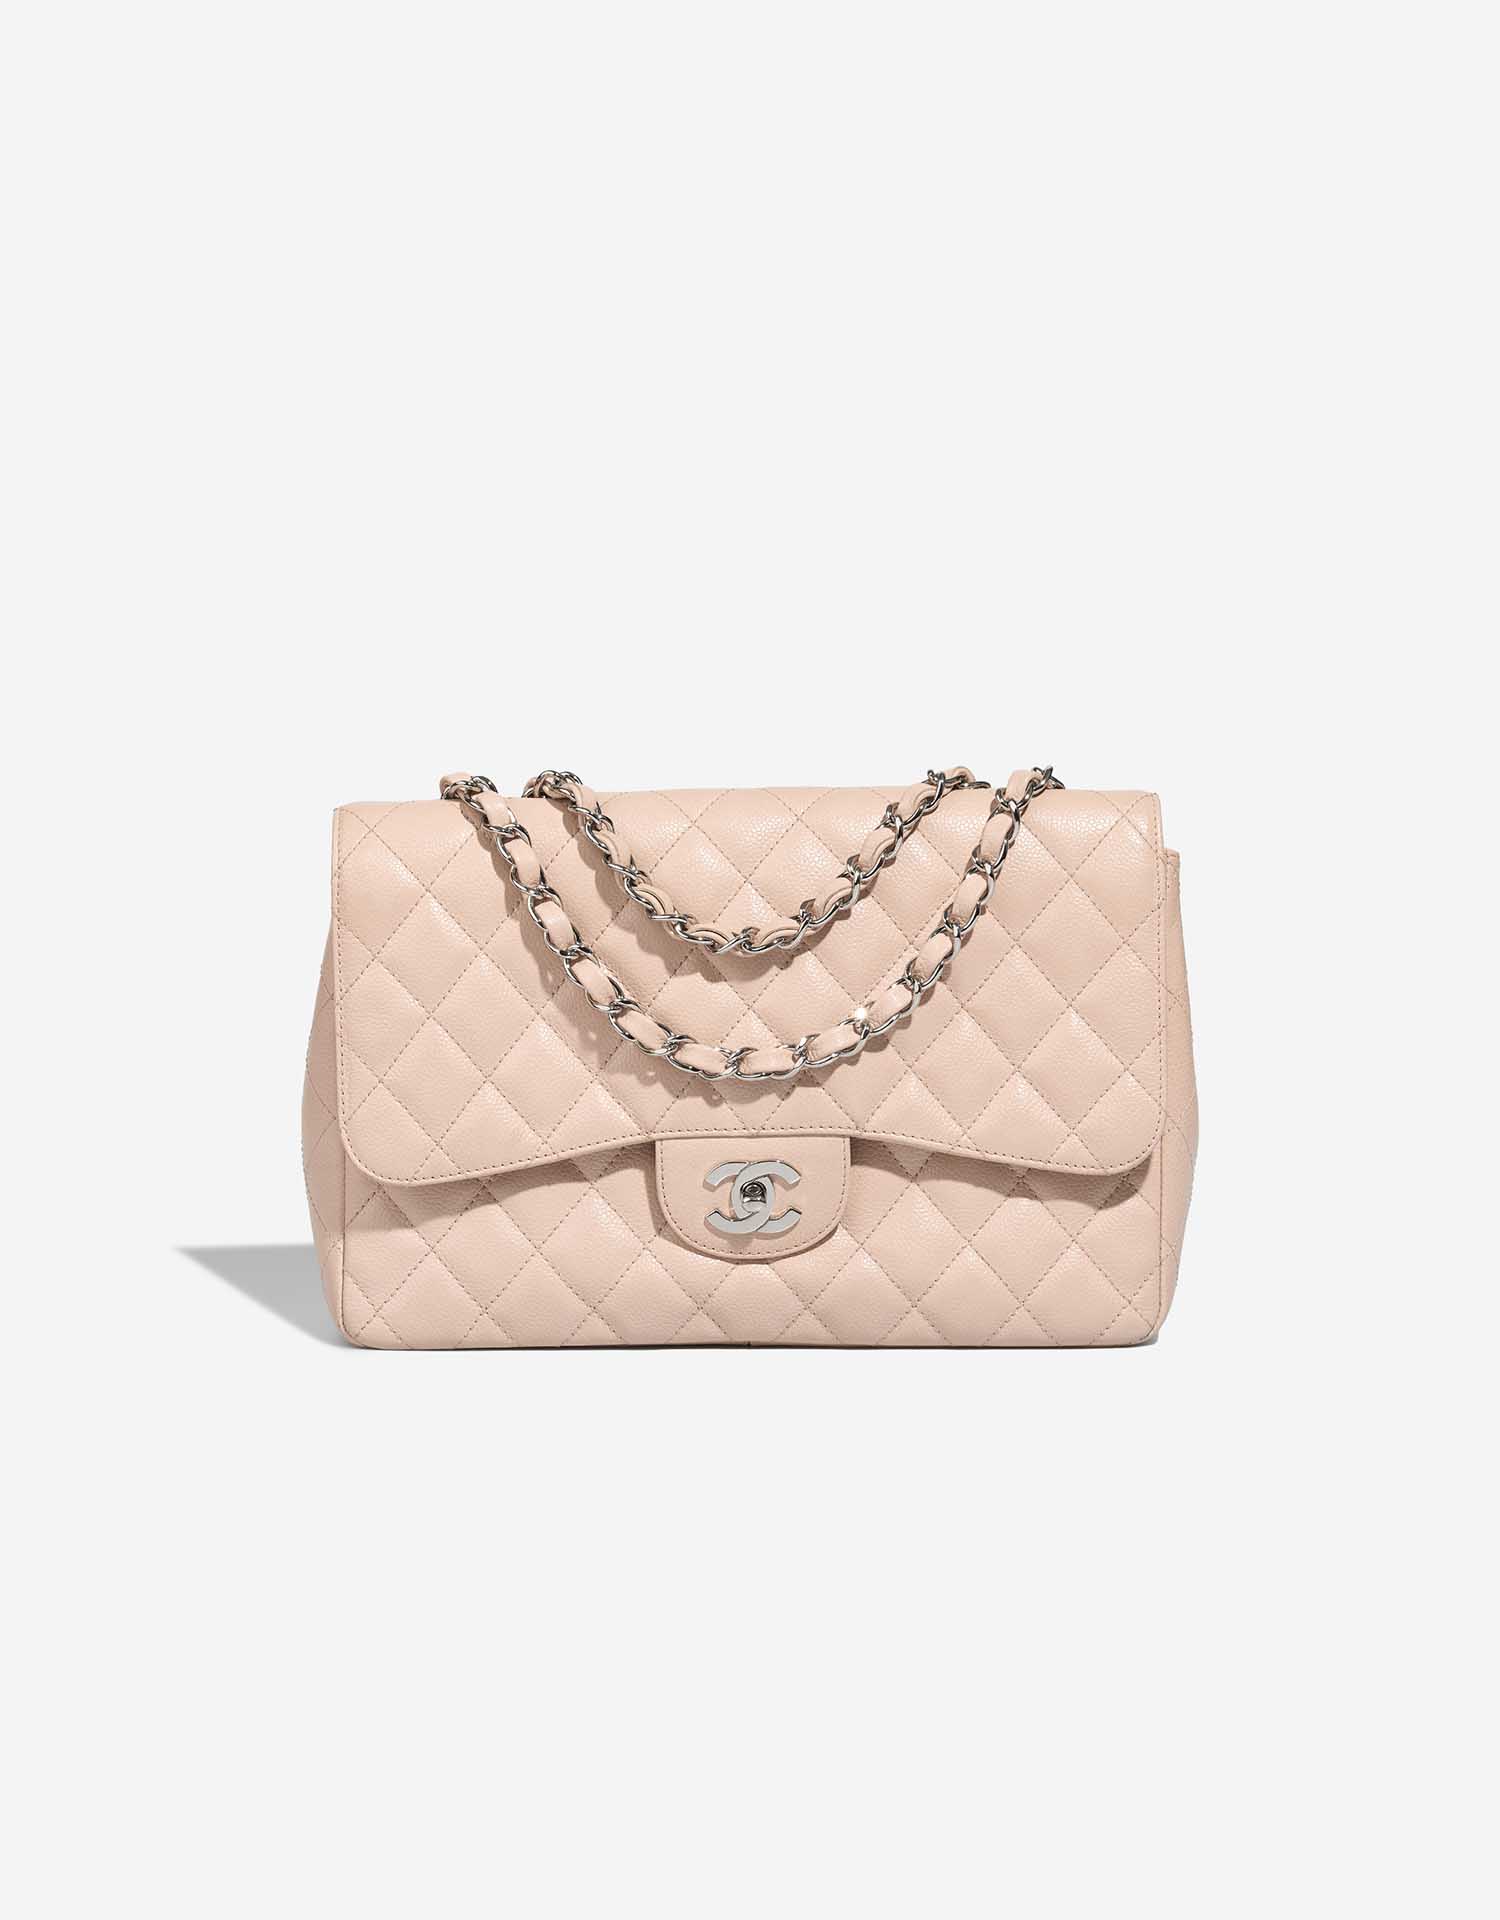 Find Your Chanel Flap Bag Size | SACLÀB